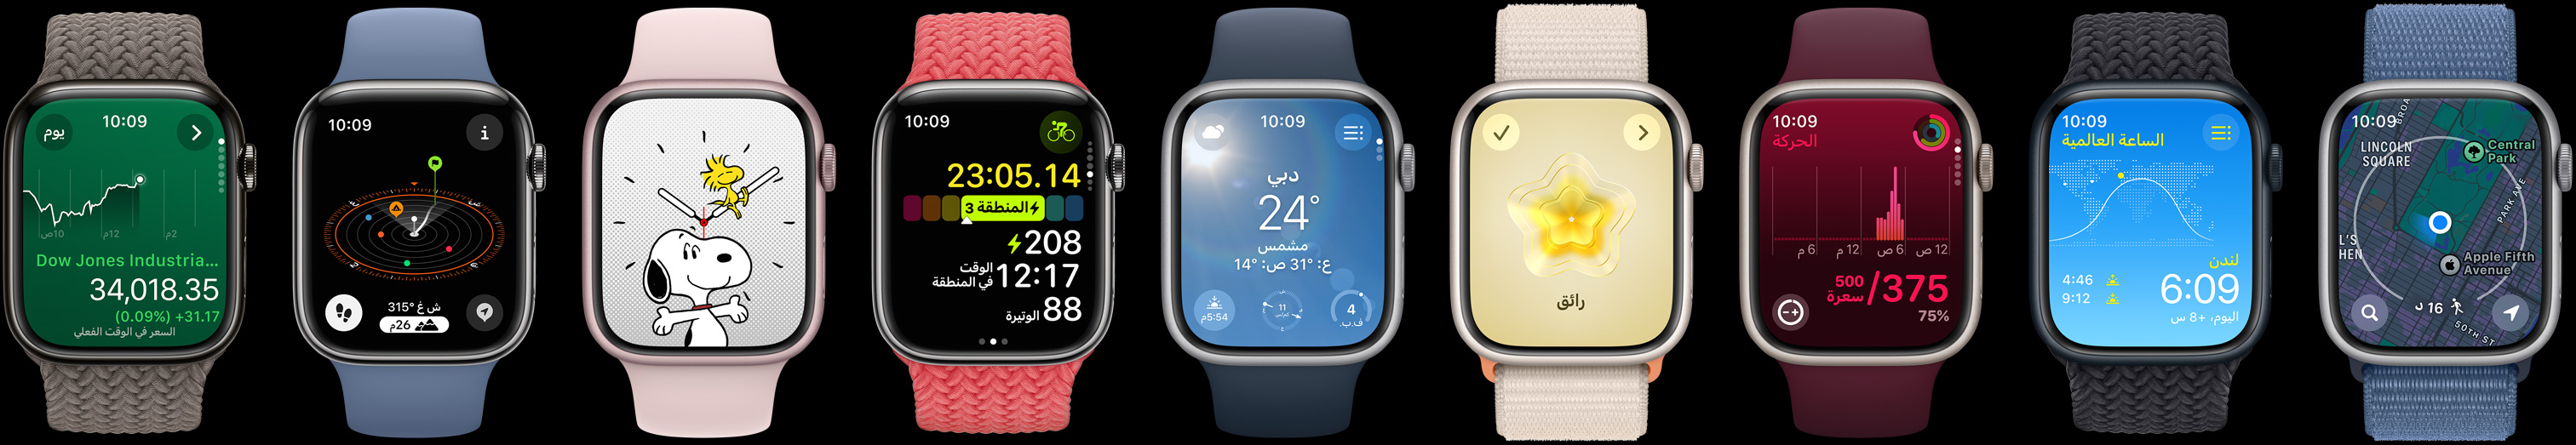 5 watch faces move left to right demonstrating how much more information can fit on each display.